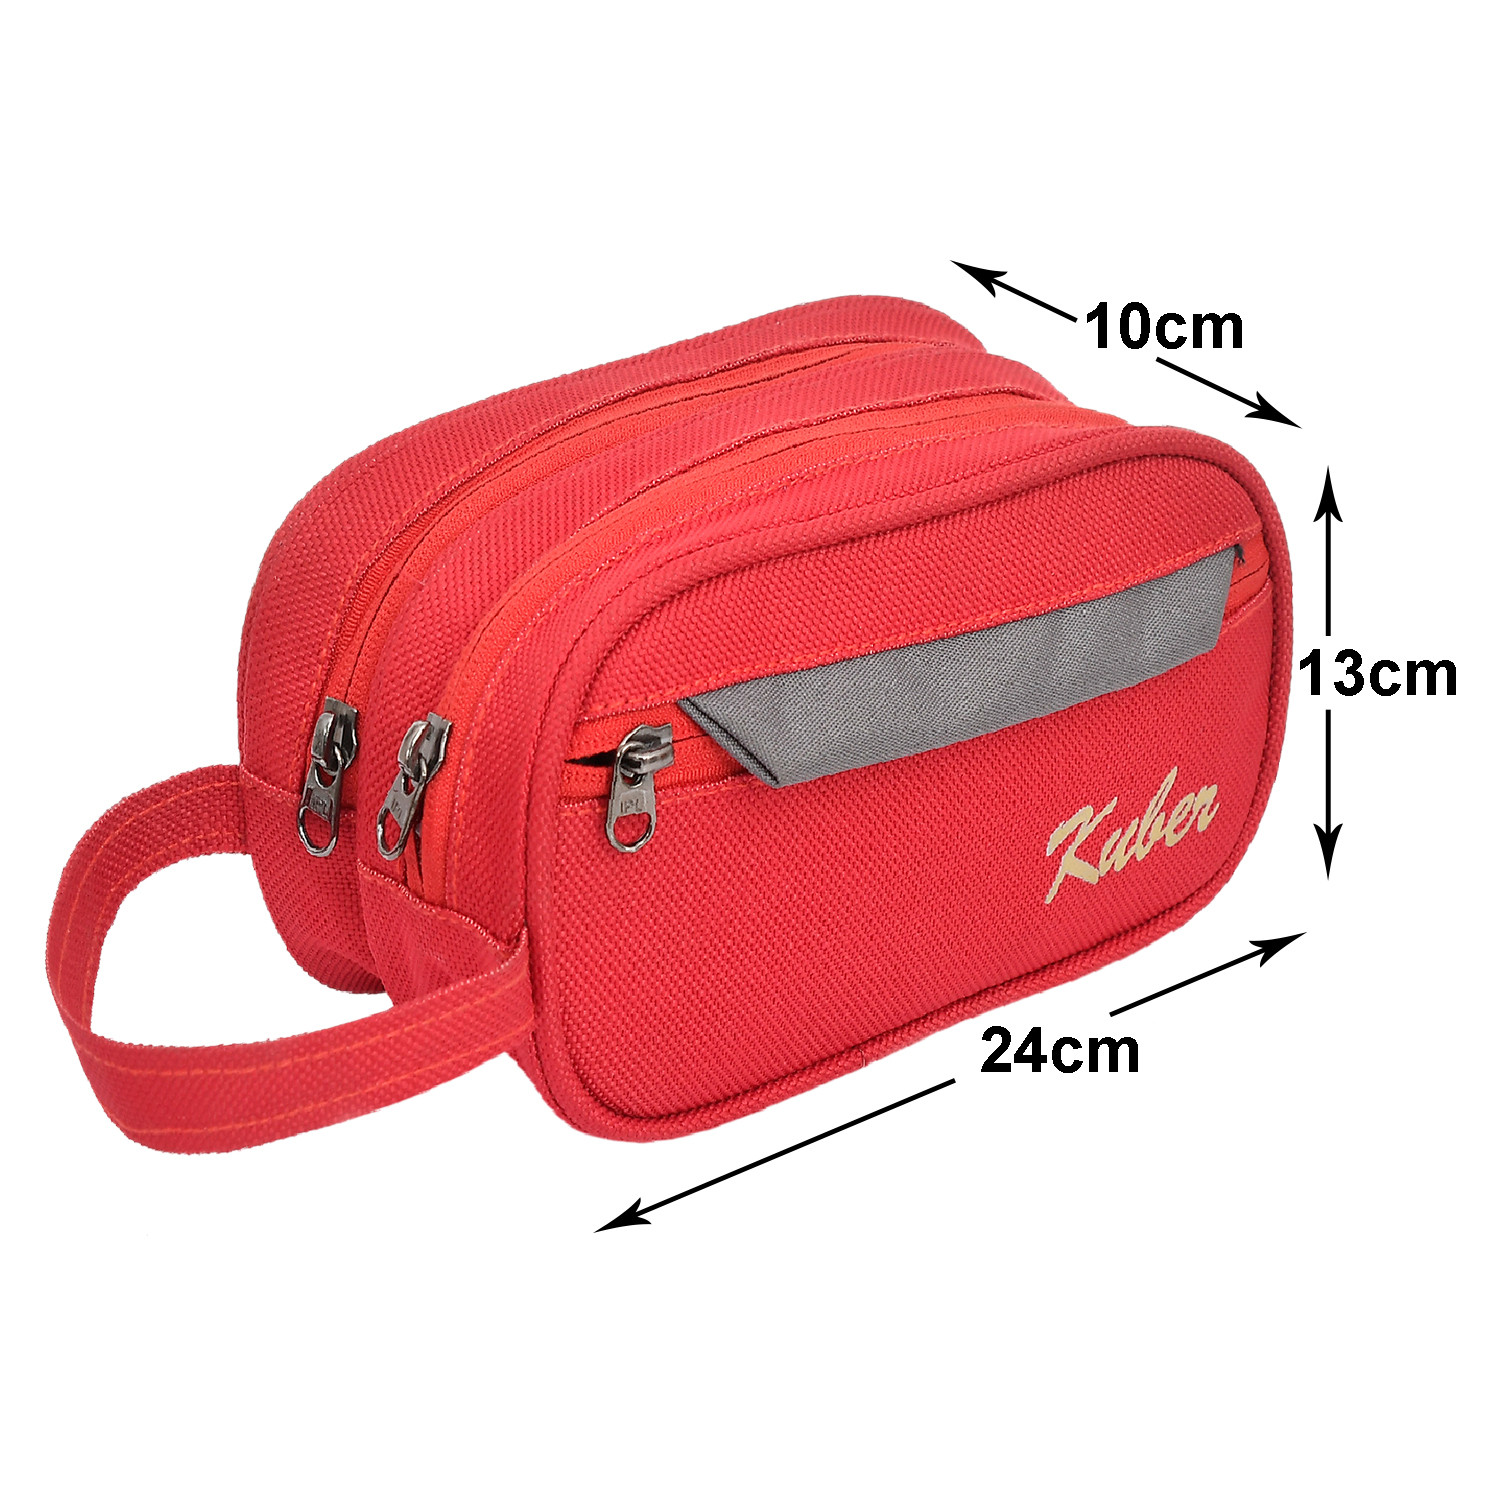 Kuber Industries Canvas Toiletry Organizer|Portable & Durable Carrying Strip Travel Shaving Doop Kit With 2 Zipper ComparMants And Fornt Zipper (Red)